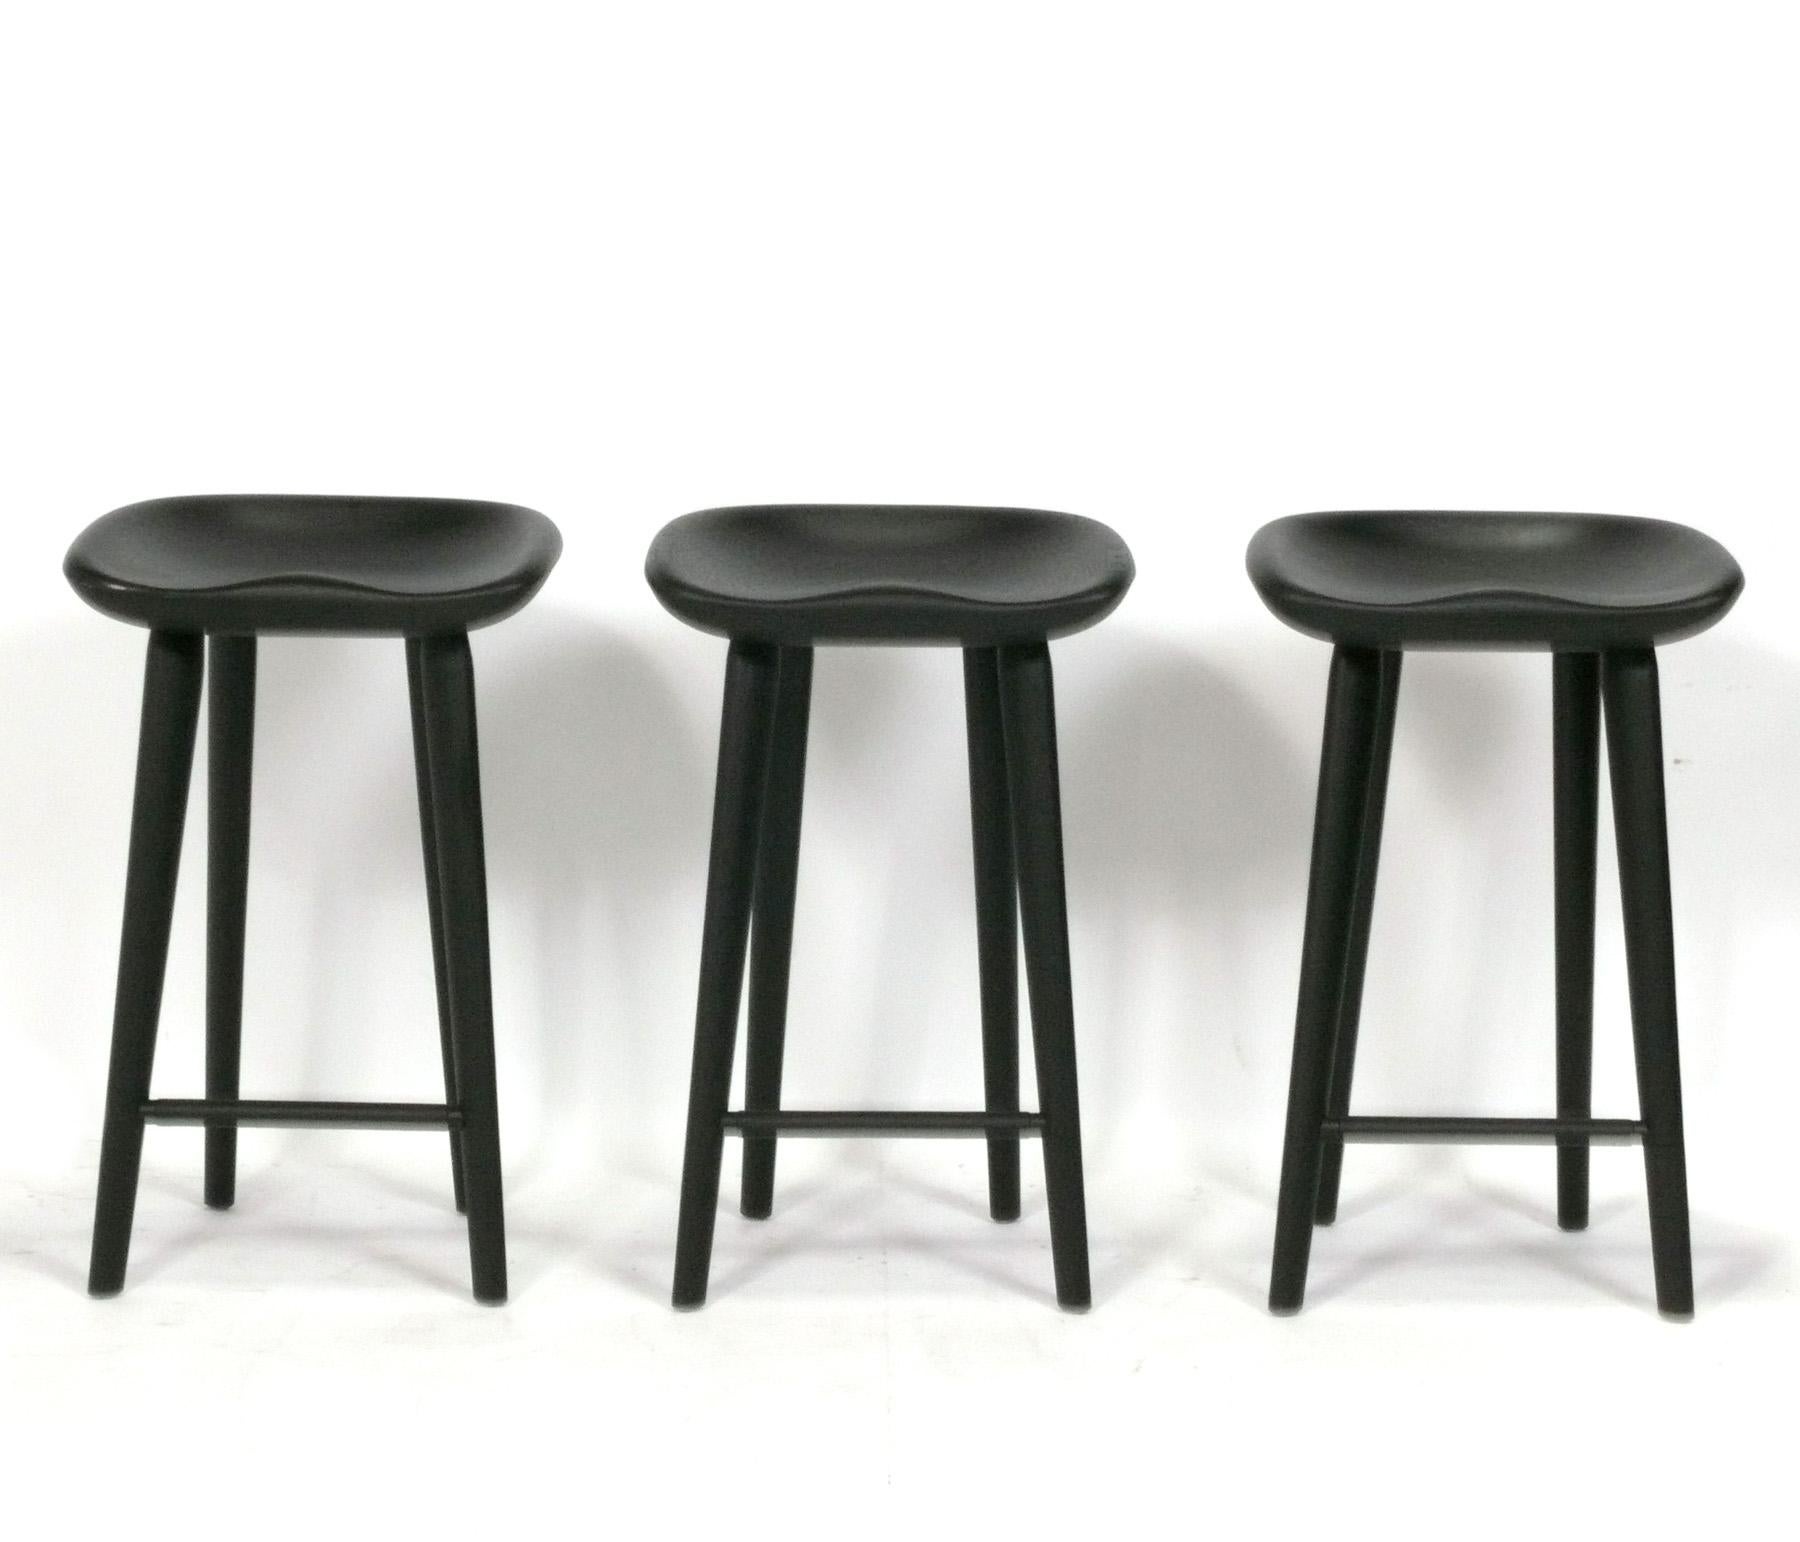 Sculptural Set of Three Tractor Barstools, designed by Craig Bassam for Bassam Fellows, made in Italy, circa 2000s. They retain their original black stained finish and are in very good shape. These are usually priced at $1500 each new. 